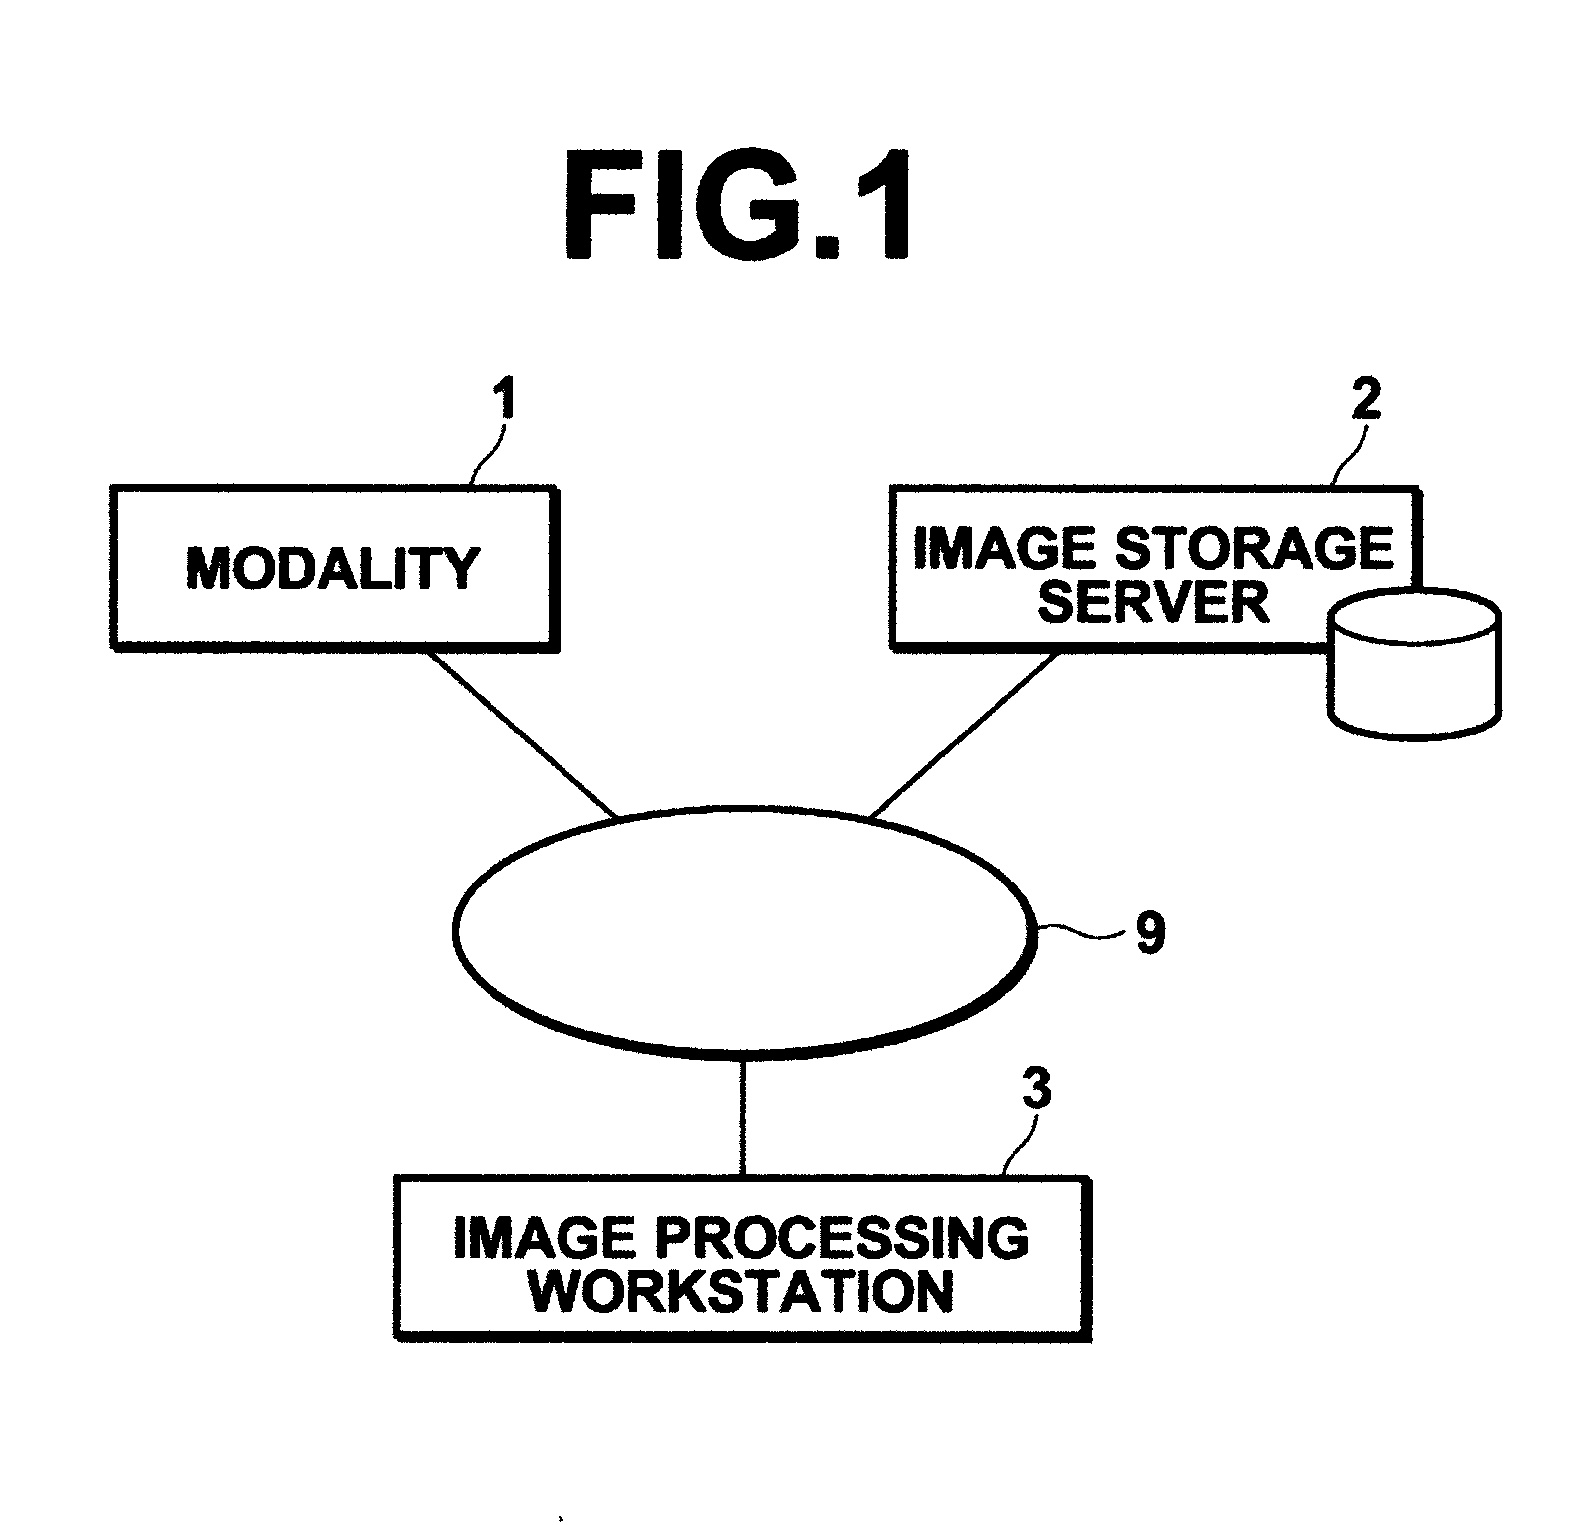 Apparatus, method, and computer readable medium for assisting medical image diagnosis using 3-D images representing internal structure